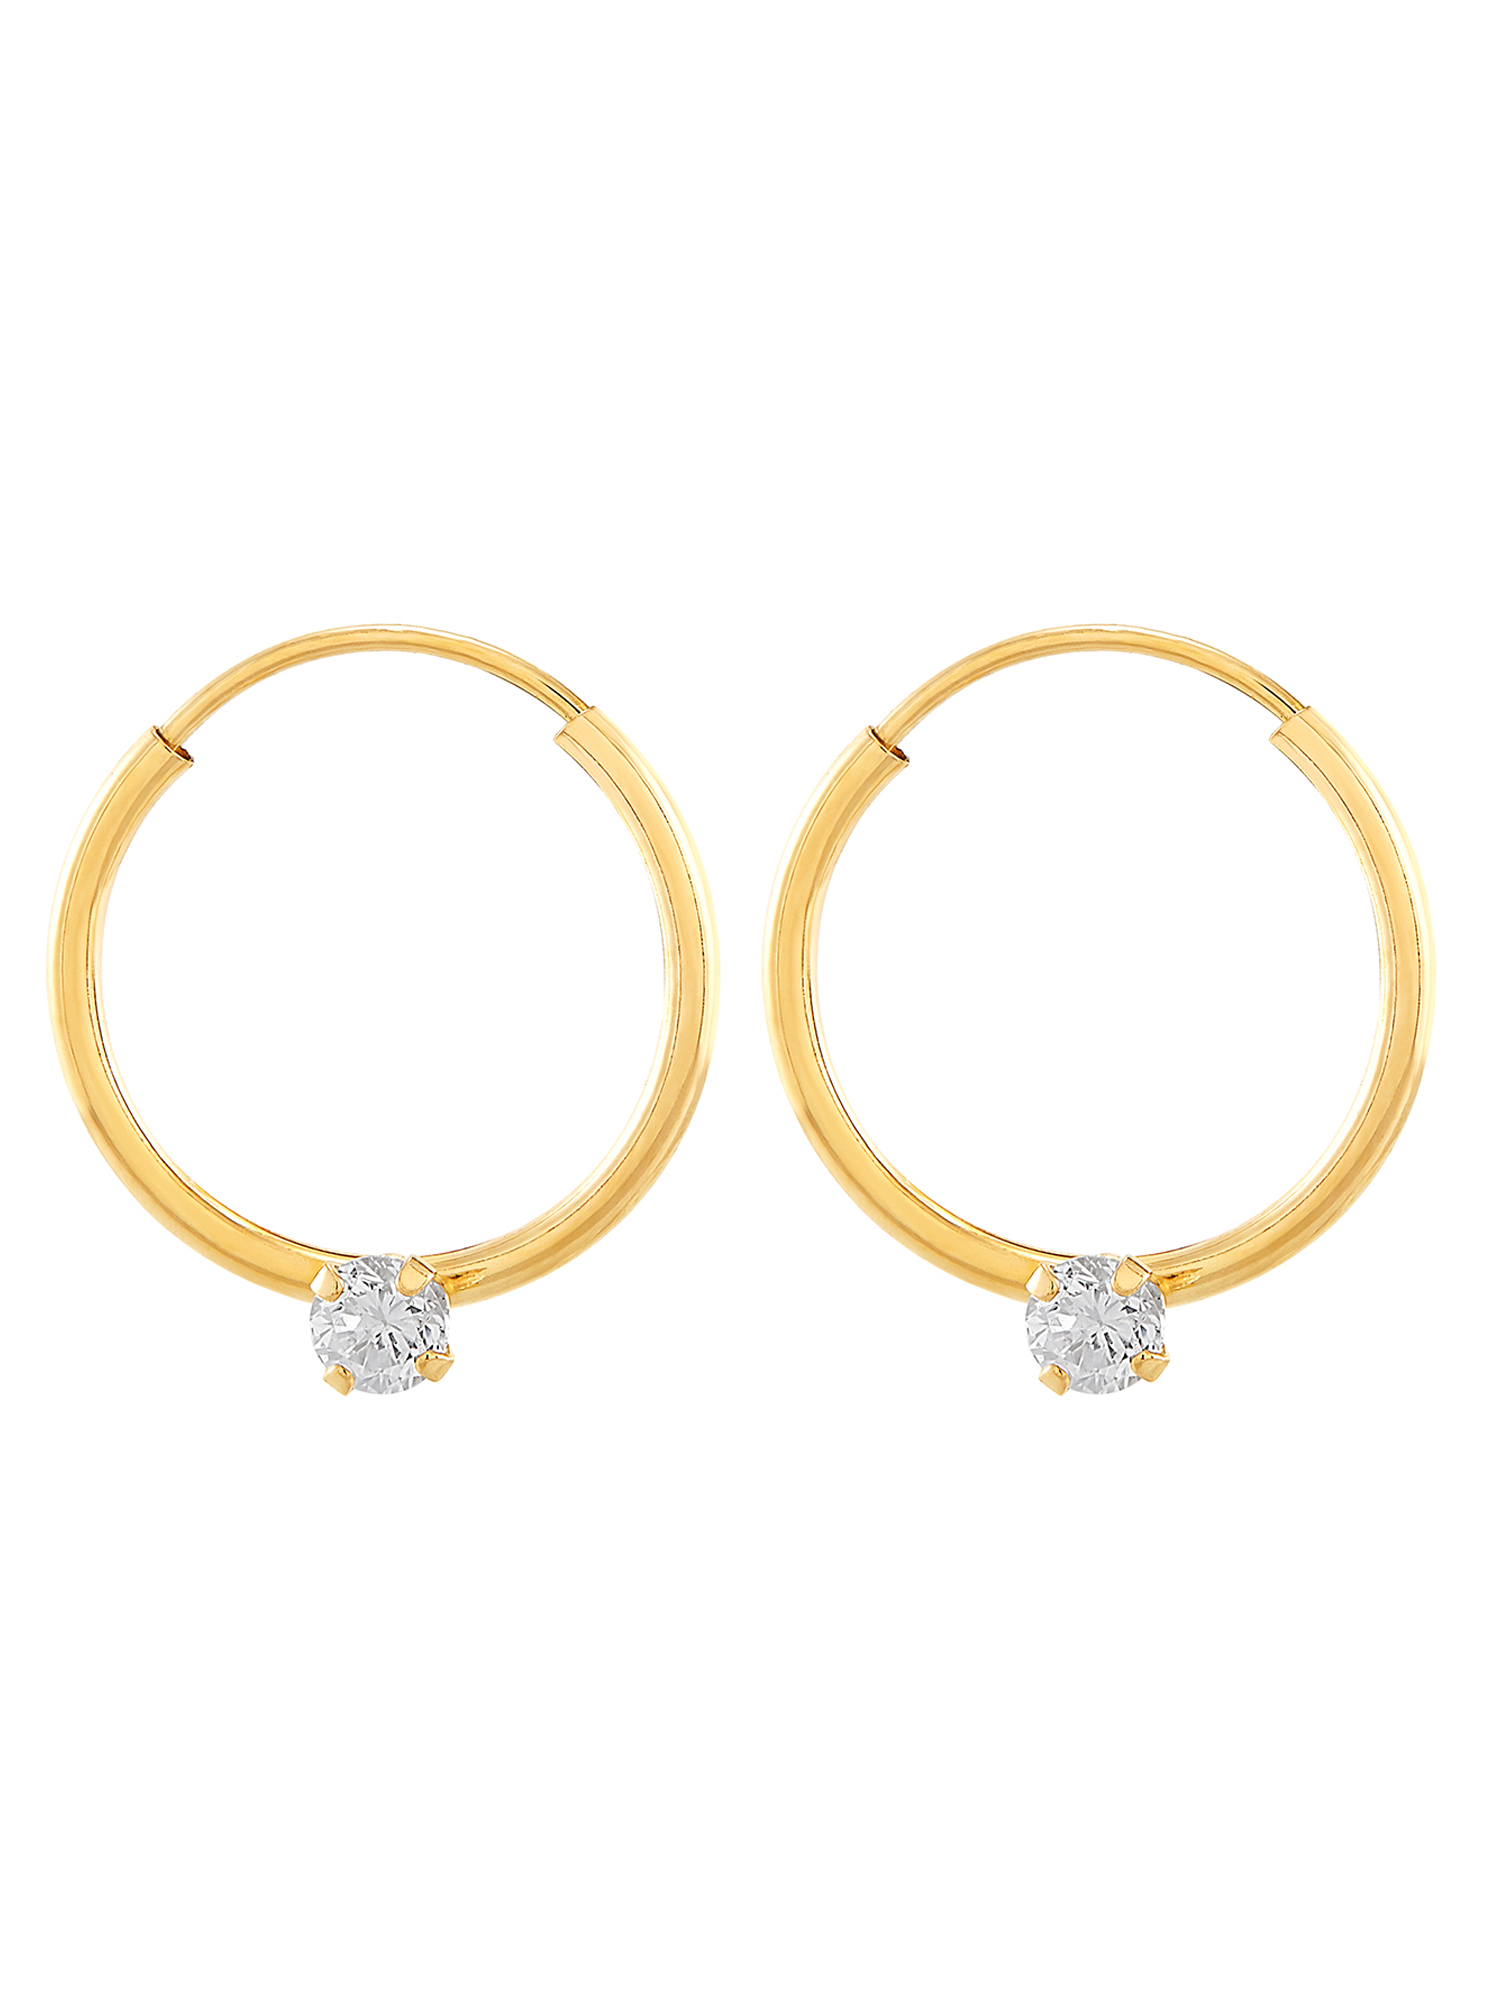 Brilliance Fine Jewelry Hoop with CZ and CZ Studs 10K Yellow Gold Set Earrings - image 4 of 8